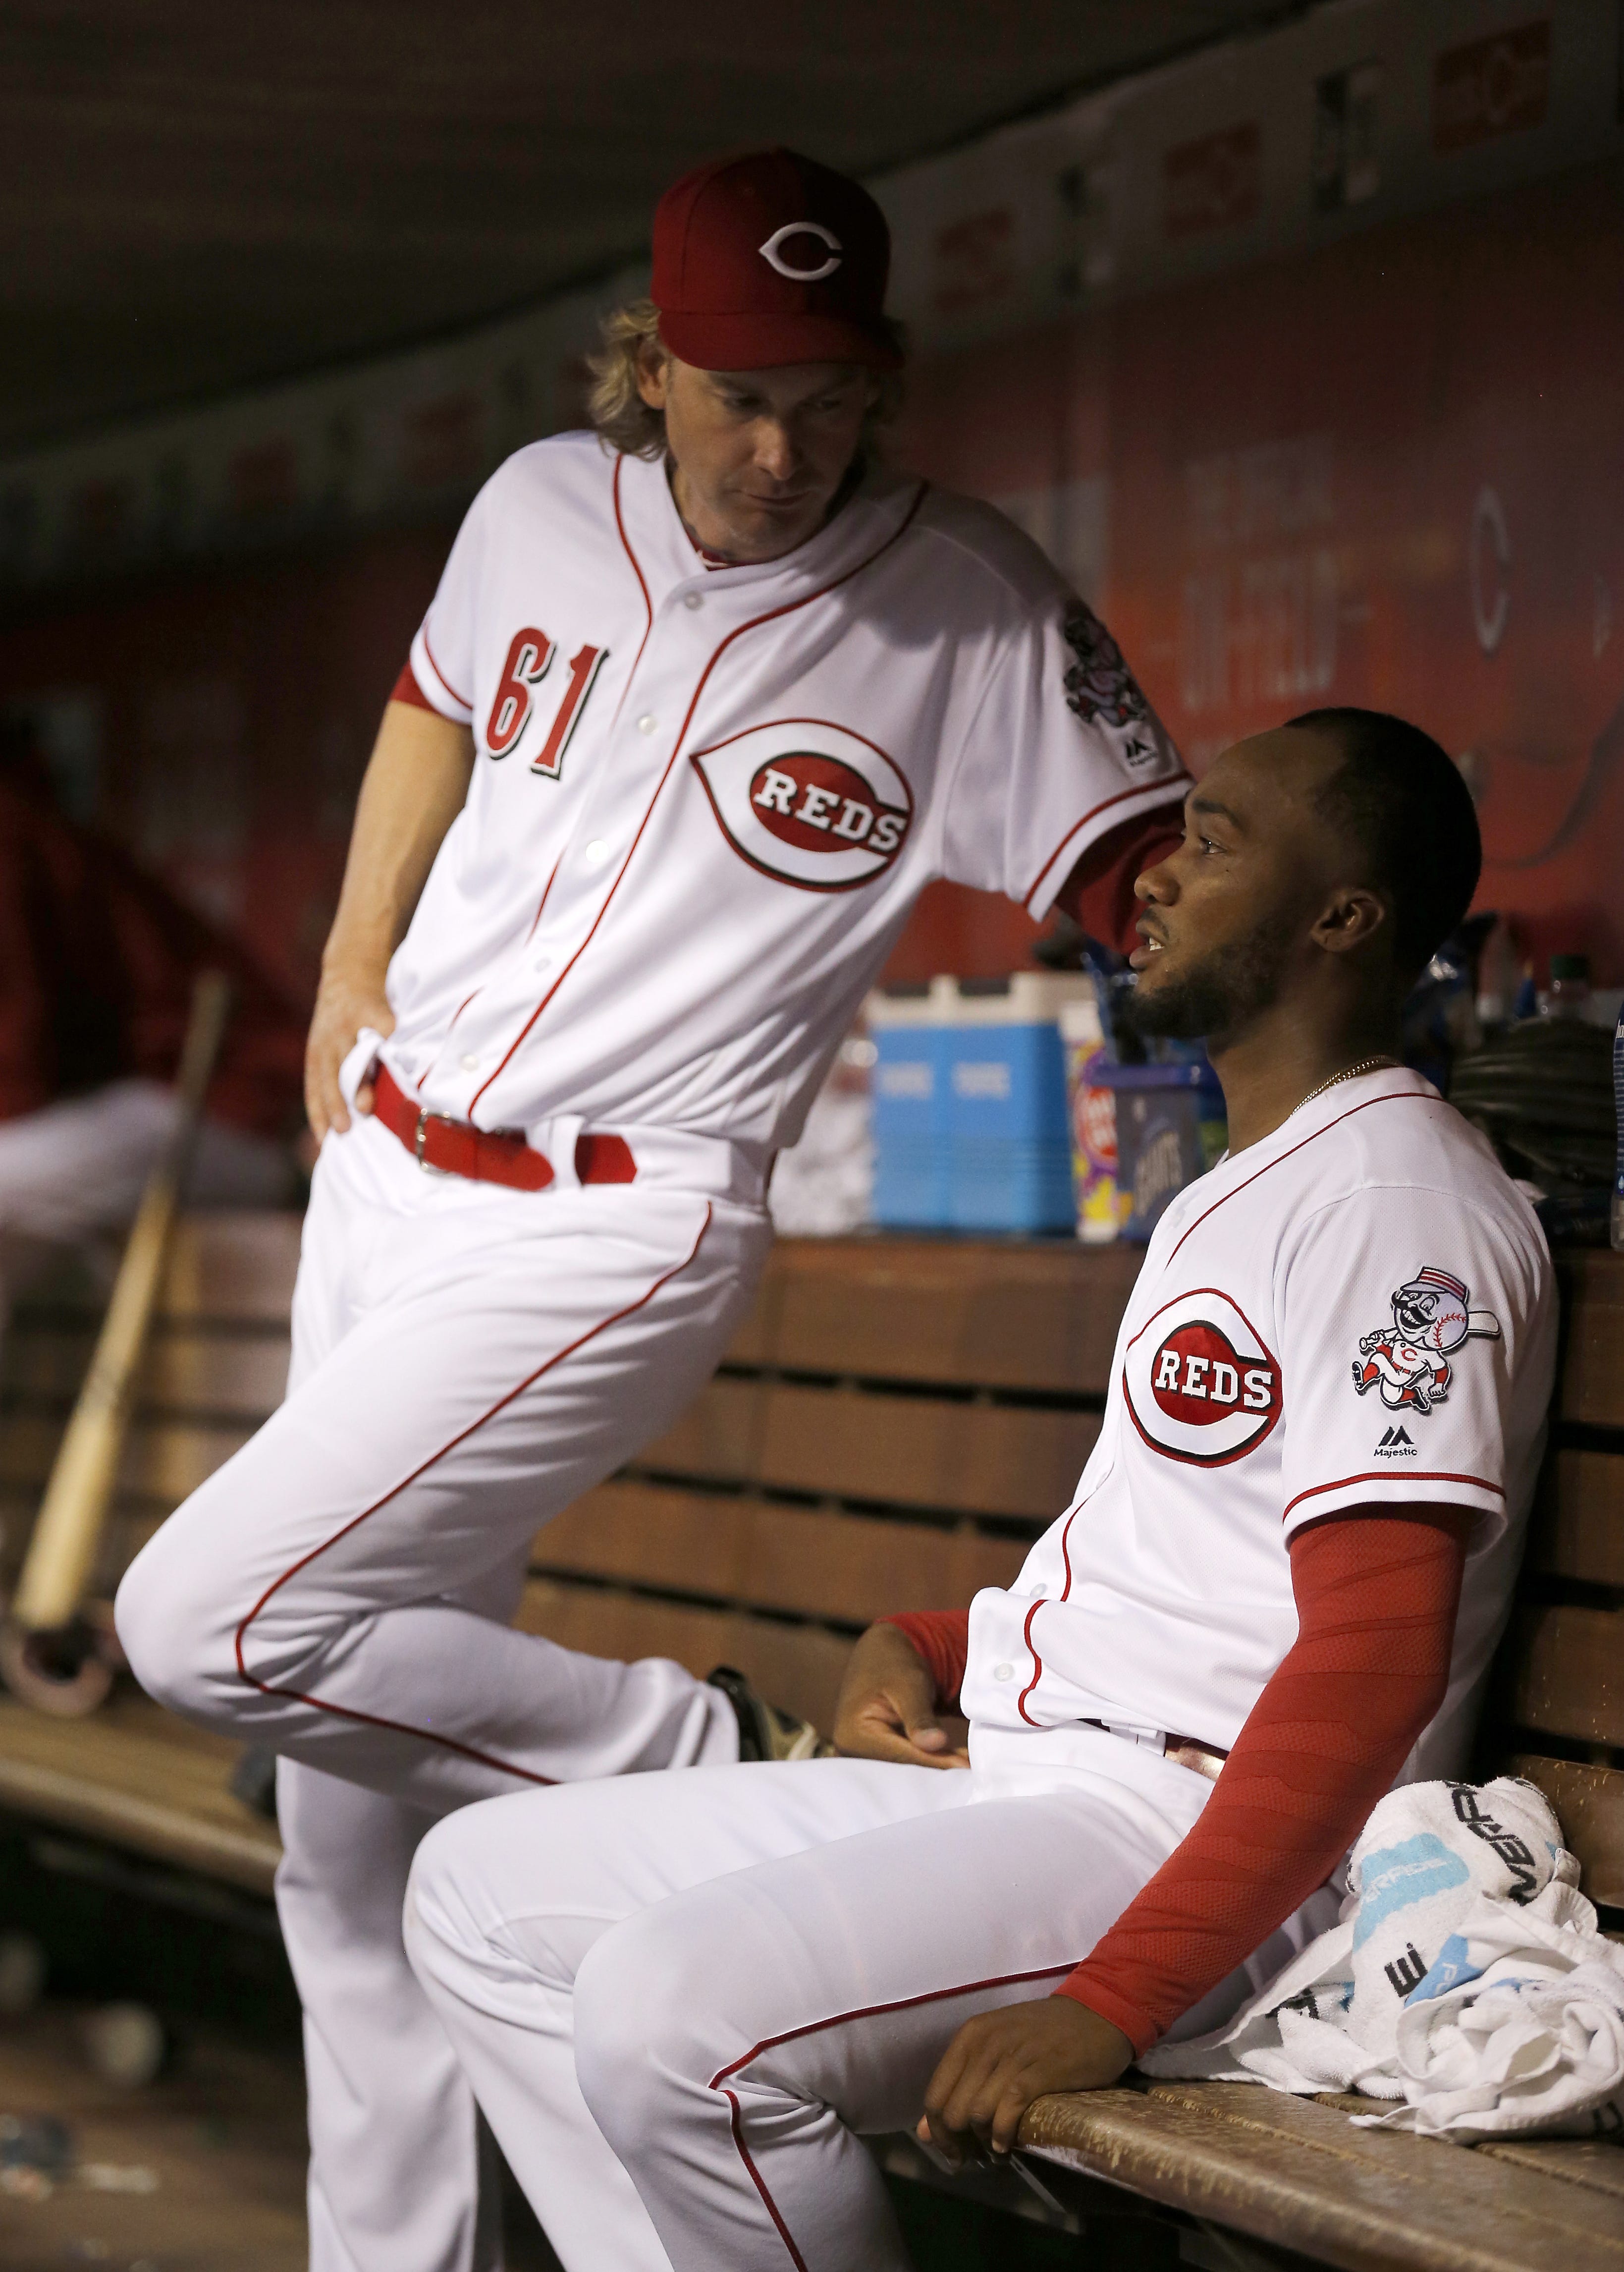 “The person that helped me a lot coming up, it’s crazy, Bronson Arroyo (left),” Amir Garrett said. “He was never rude to me. He was so down-to-earth as a player and as a person."